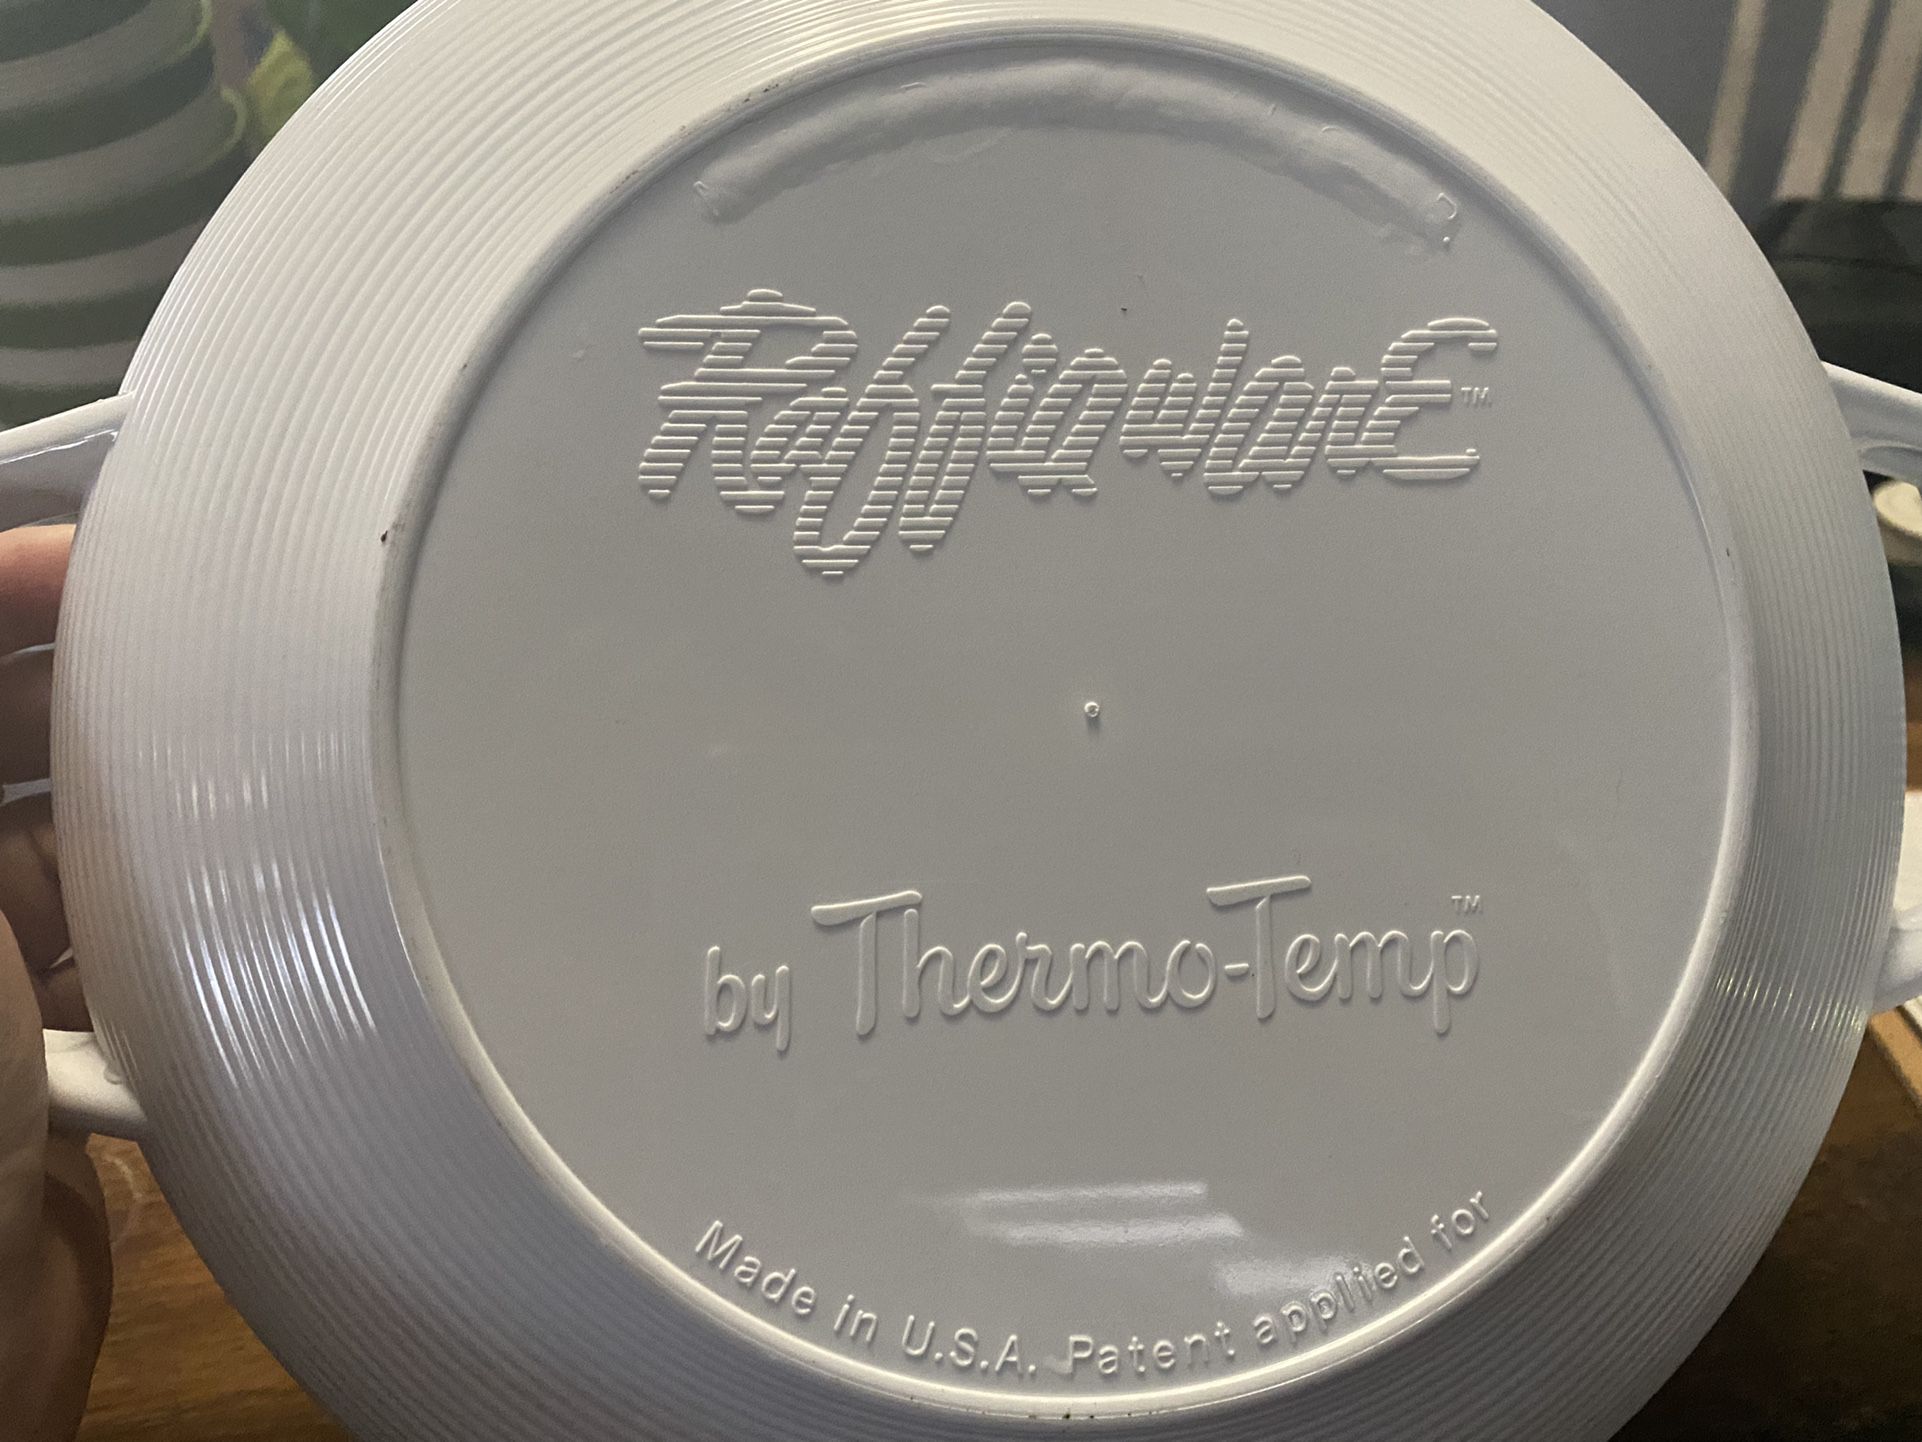  RAFFIAWARE THERMO-TEMP COVERED SERVING BOWL MALLORY RANDALL green lid White Bowl.  10 1/3” diameter and 5” tall to top of lid